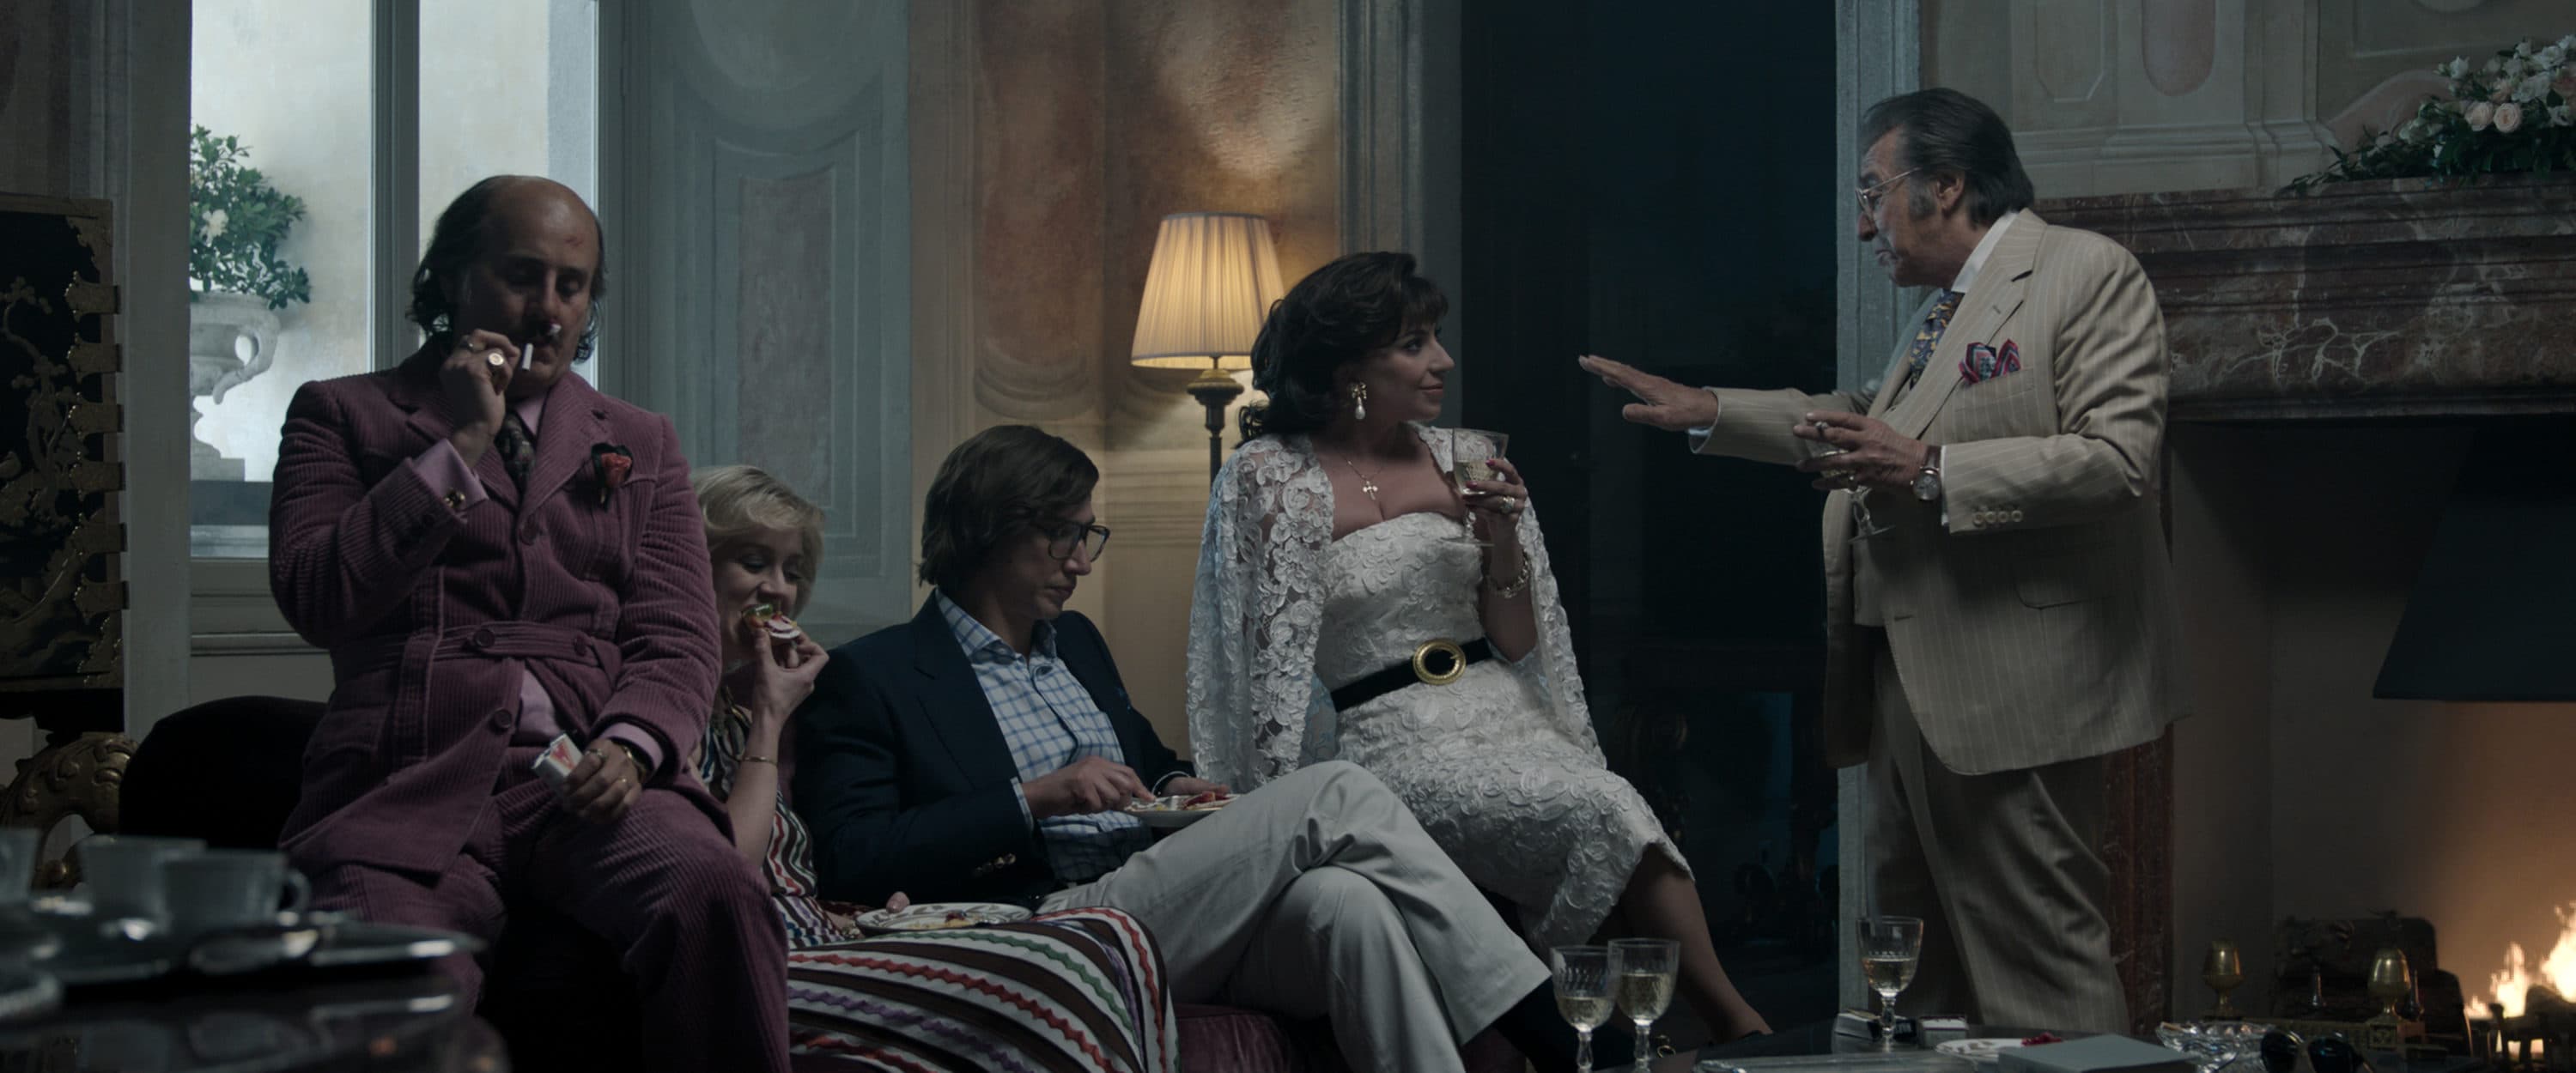 Left to right: Jared Leto as Paolo Gucci, Florence Andrews as Jenny Gucci, Adam Driver as Maurizio Gucci, Lady Gaga as Patrizia Reggiani and Al Pacino as Aldo Gucci in Ridley Scott’s &quot;House of Gucci.&quot; (Courtesy Metro Goldwyn Mayer Pictures Inc.)